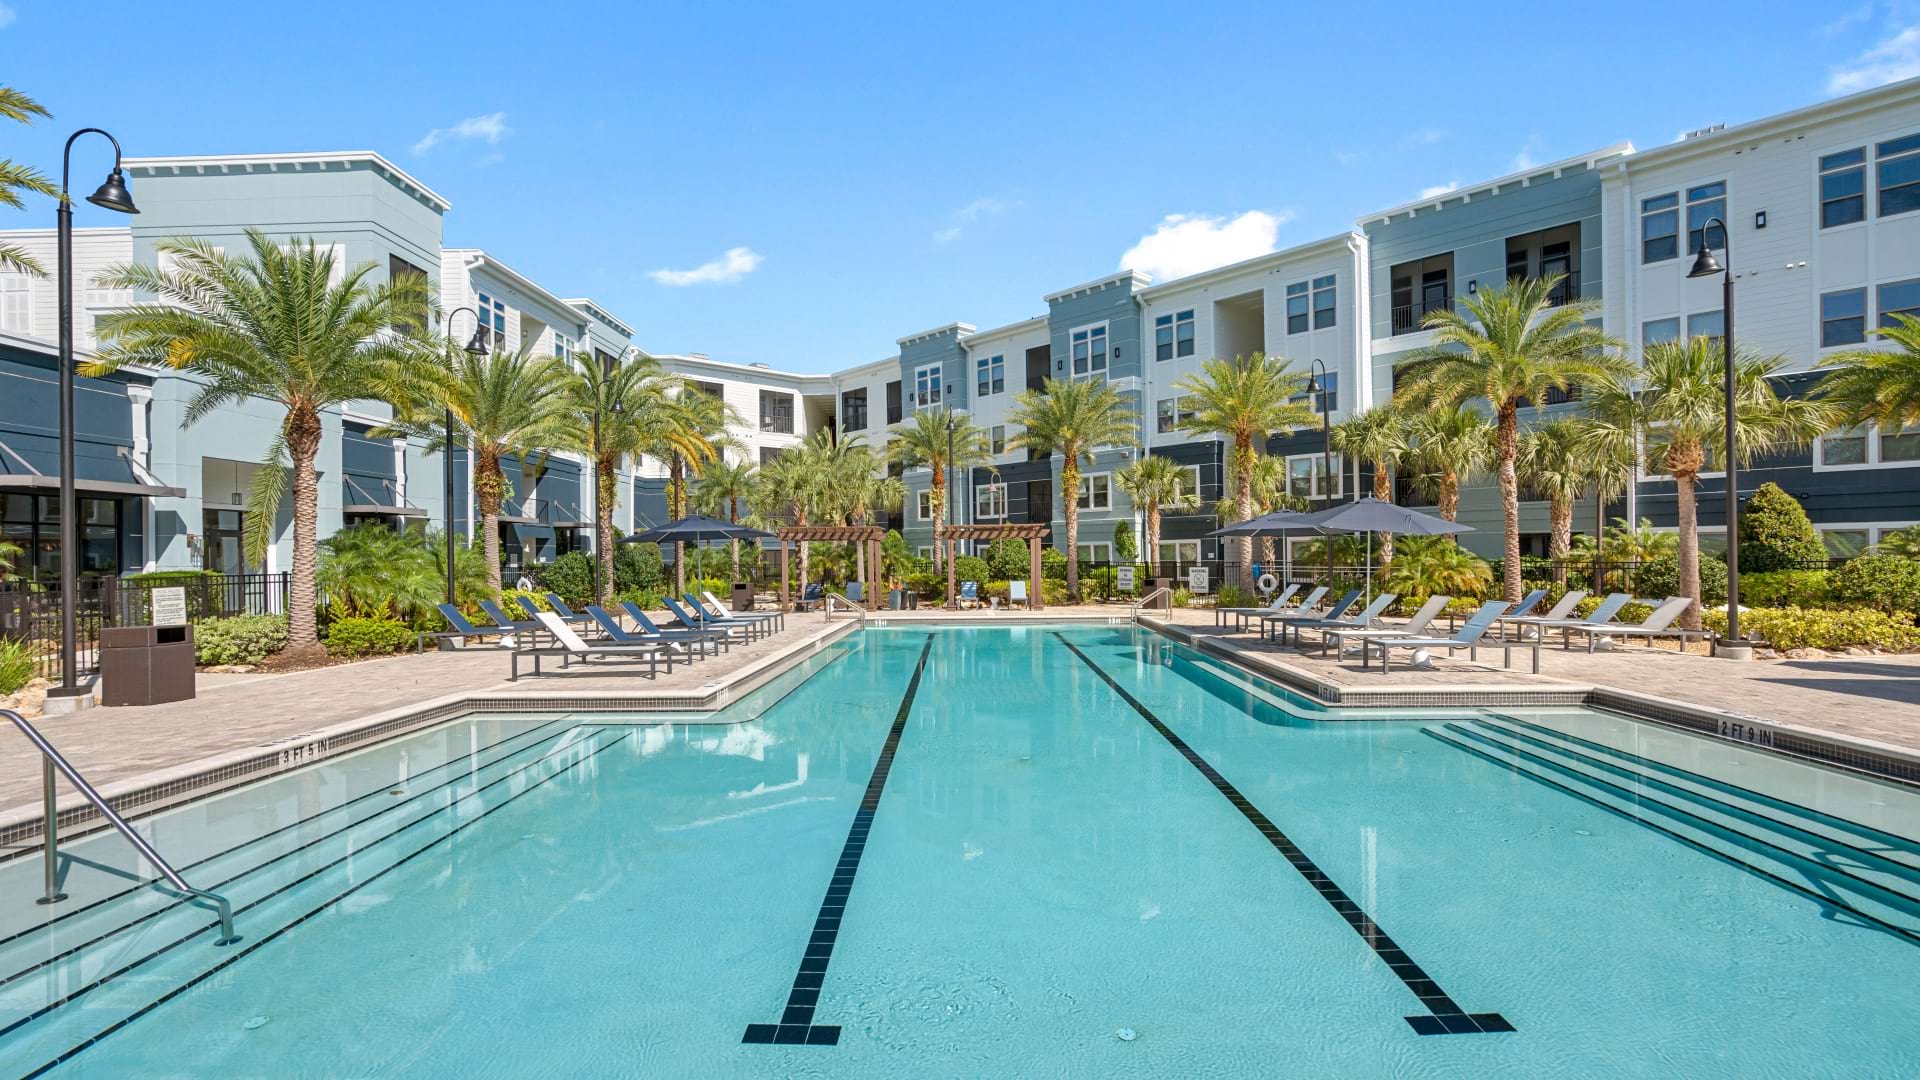 Disney World apartments with swimming pool